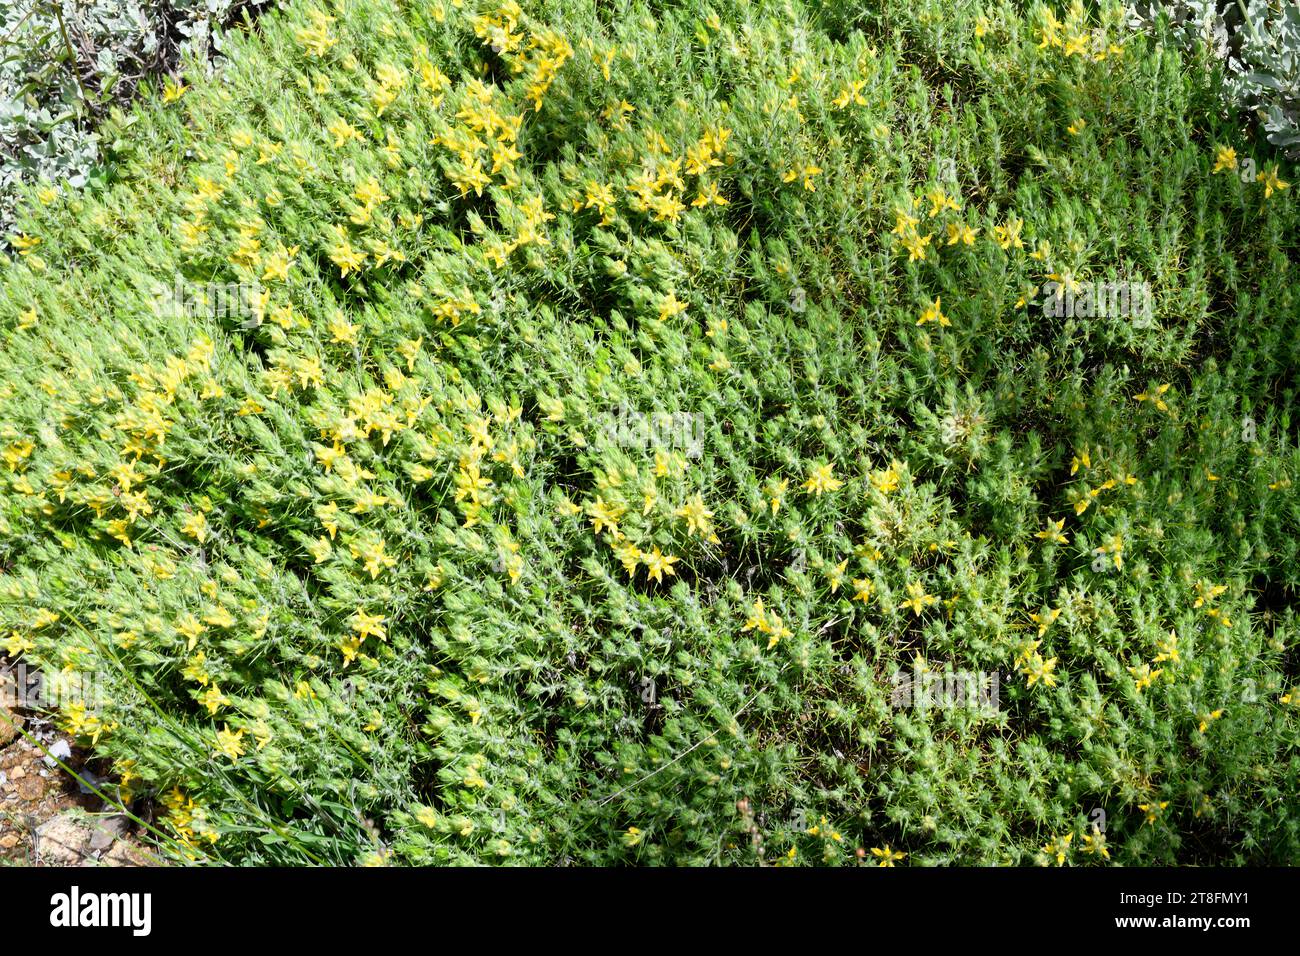 Aulaga (Genista hirsuta lanuginosa) is a serpentinophyte shrub endemic to south Spain. This photo was taken in Cadiz, Andalusia, Spain. Stock Photo